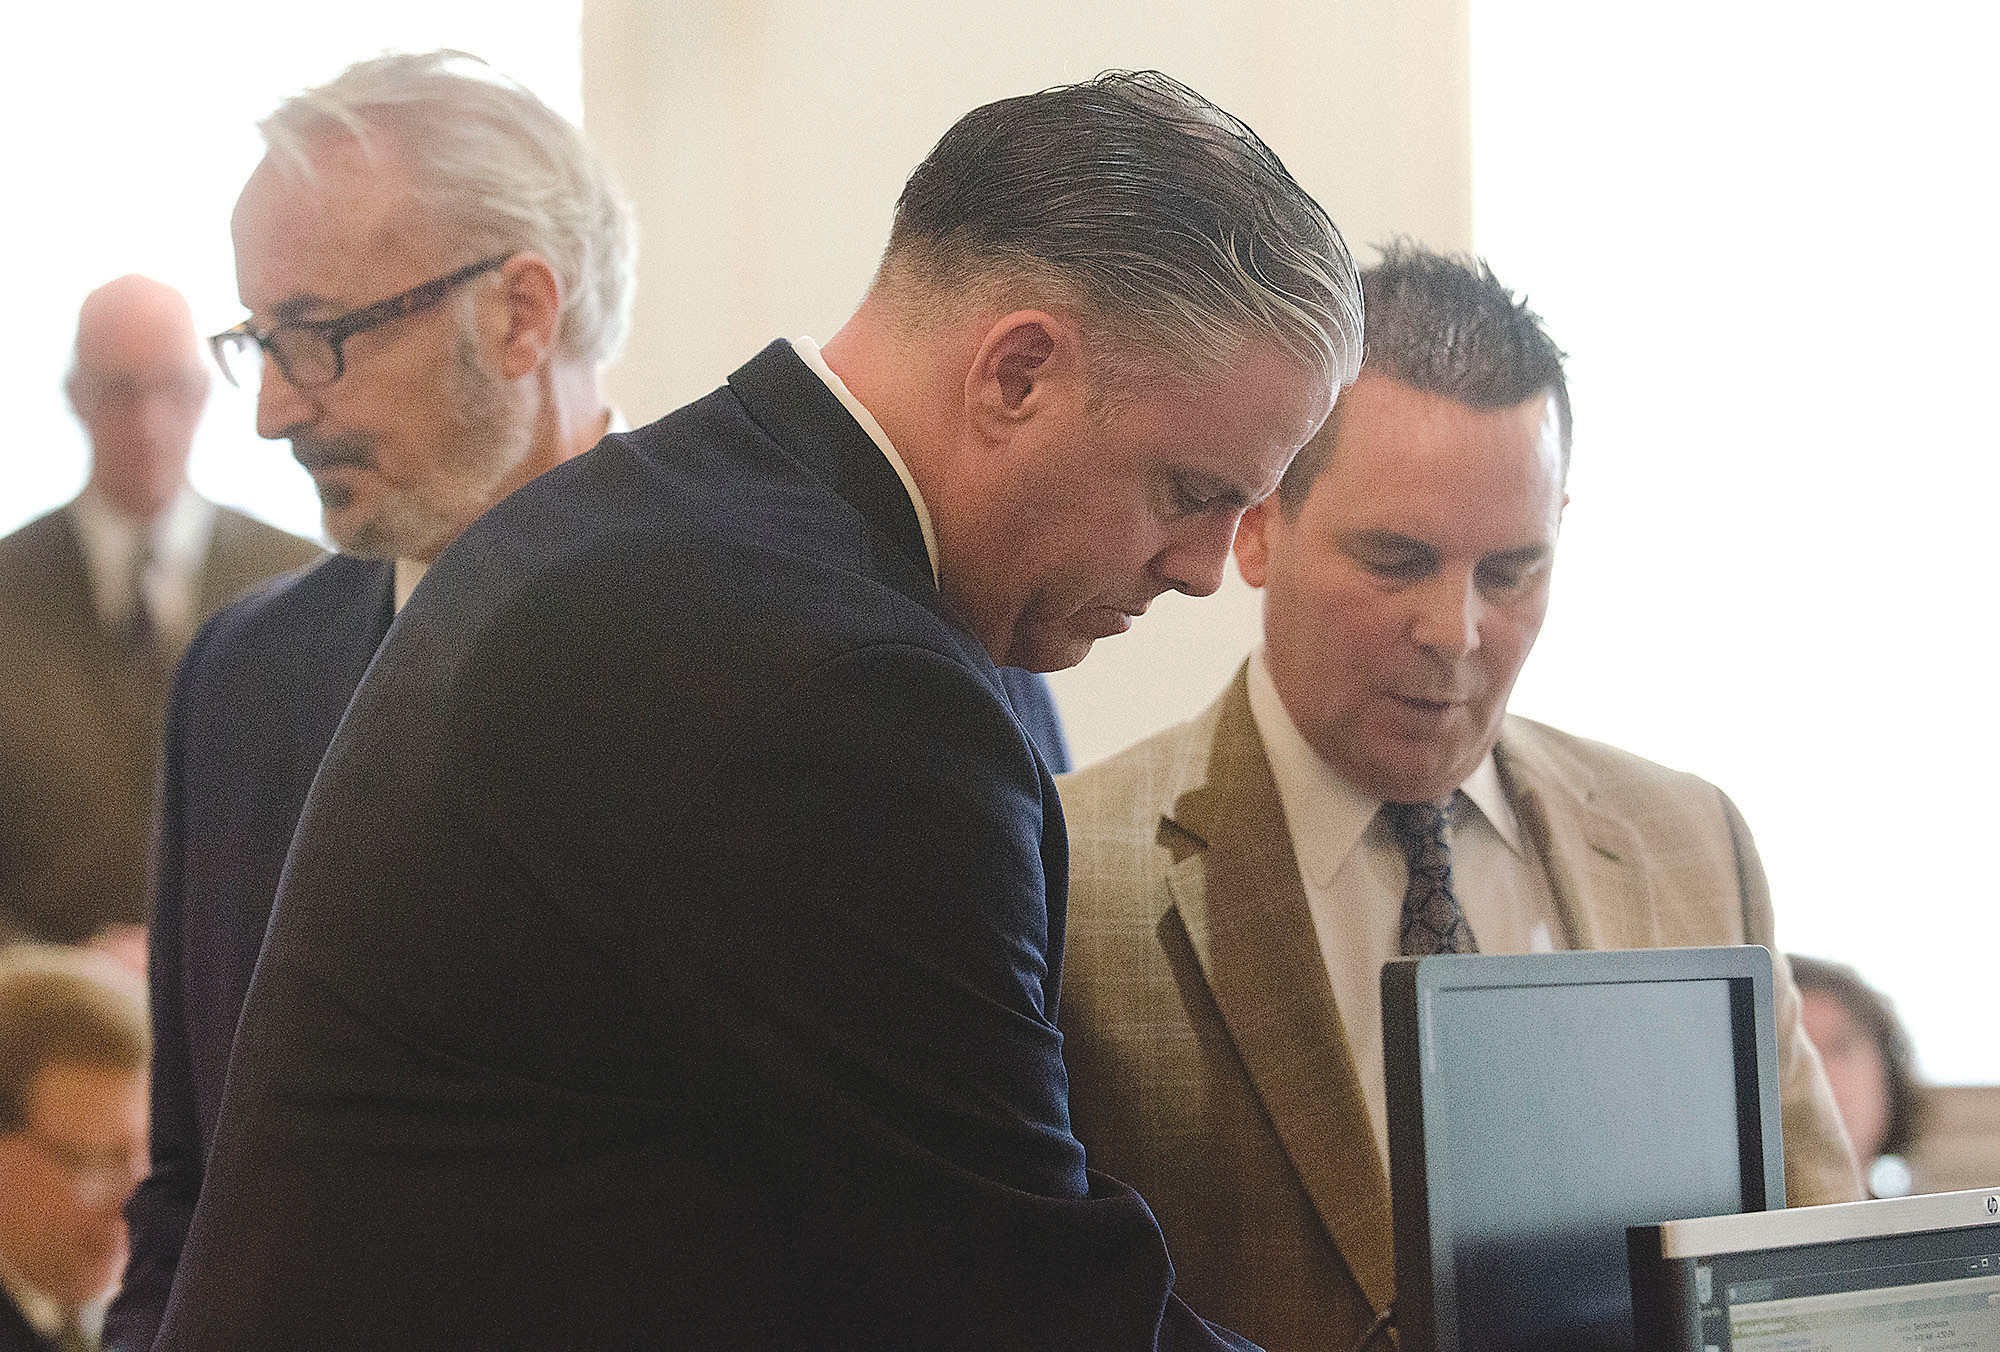 Lt. Timothy Panell (center), flanked by his lawyer Norman L. Landroche Jr. (right) and prosecutor John Bernardo (left) in 2nd District Court, Nov. 3, 2016 at one of nine (repeatedly continued) pre-trial conferences.